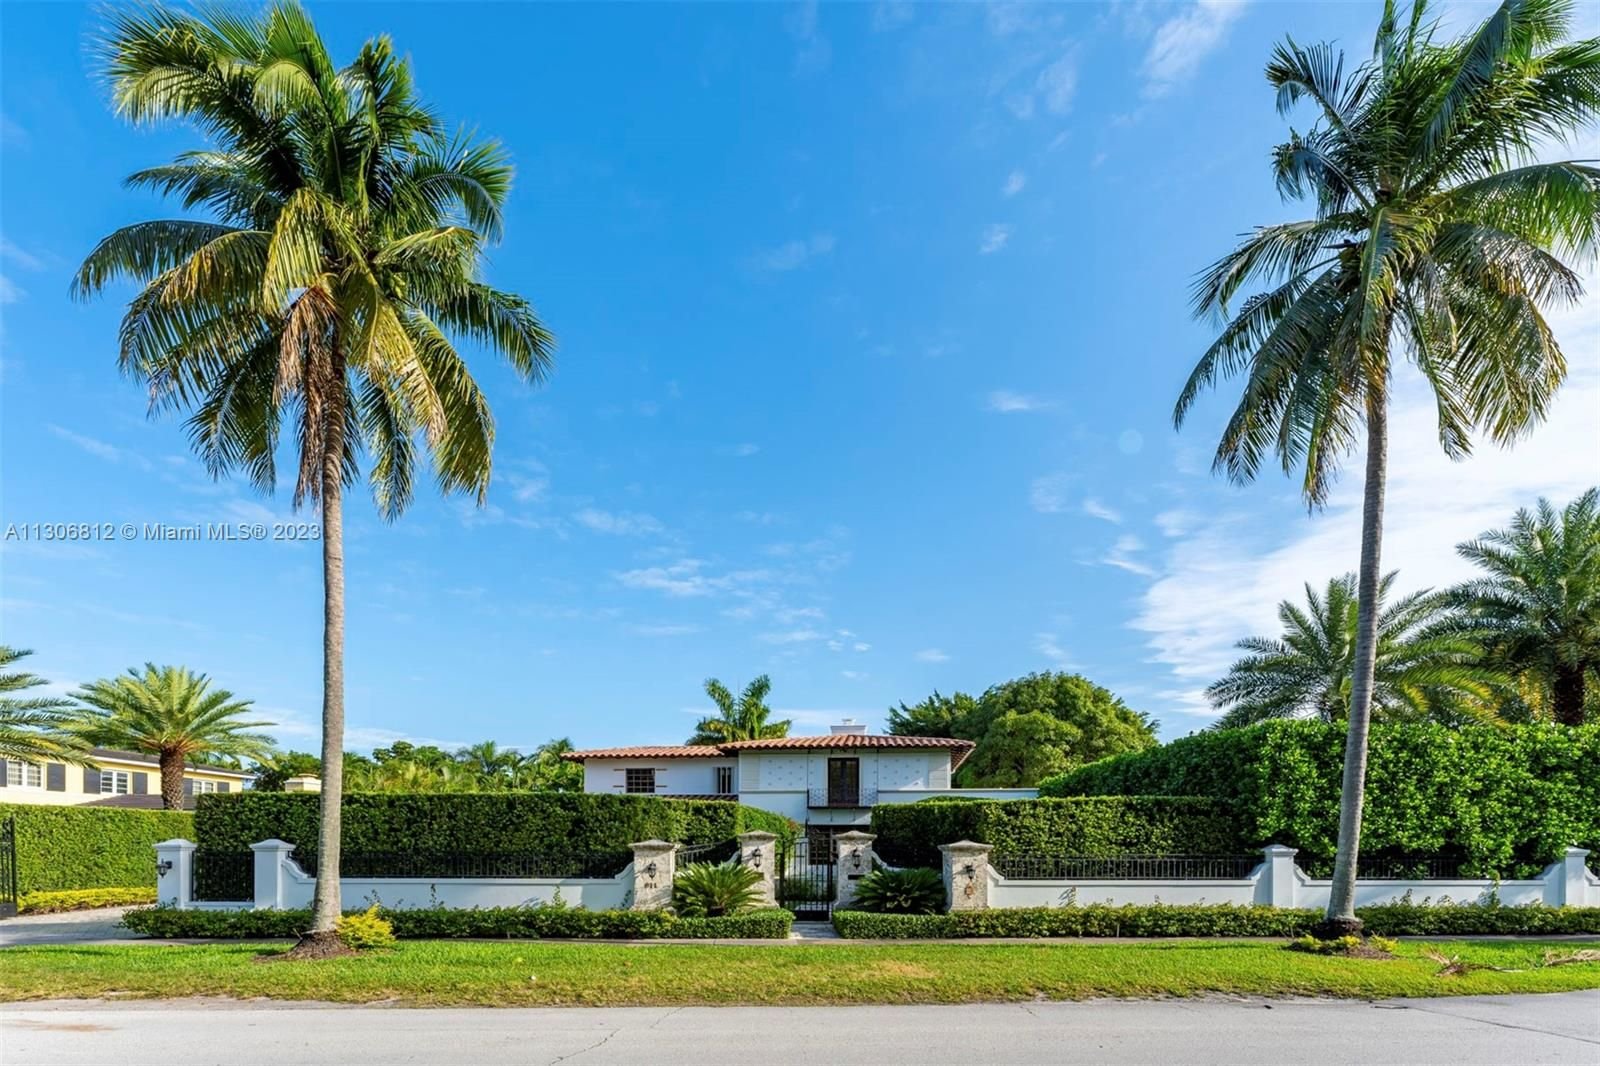 Real estate property located at 611 Greenway Dr, Miami-Dade County, Coral Gables, FL